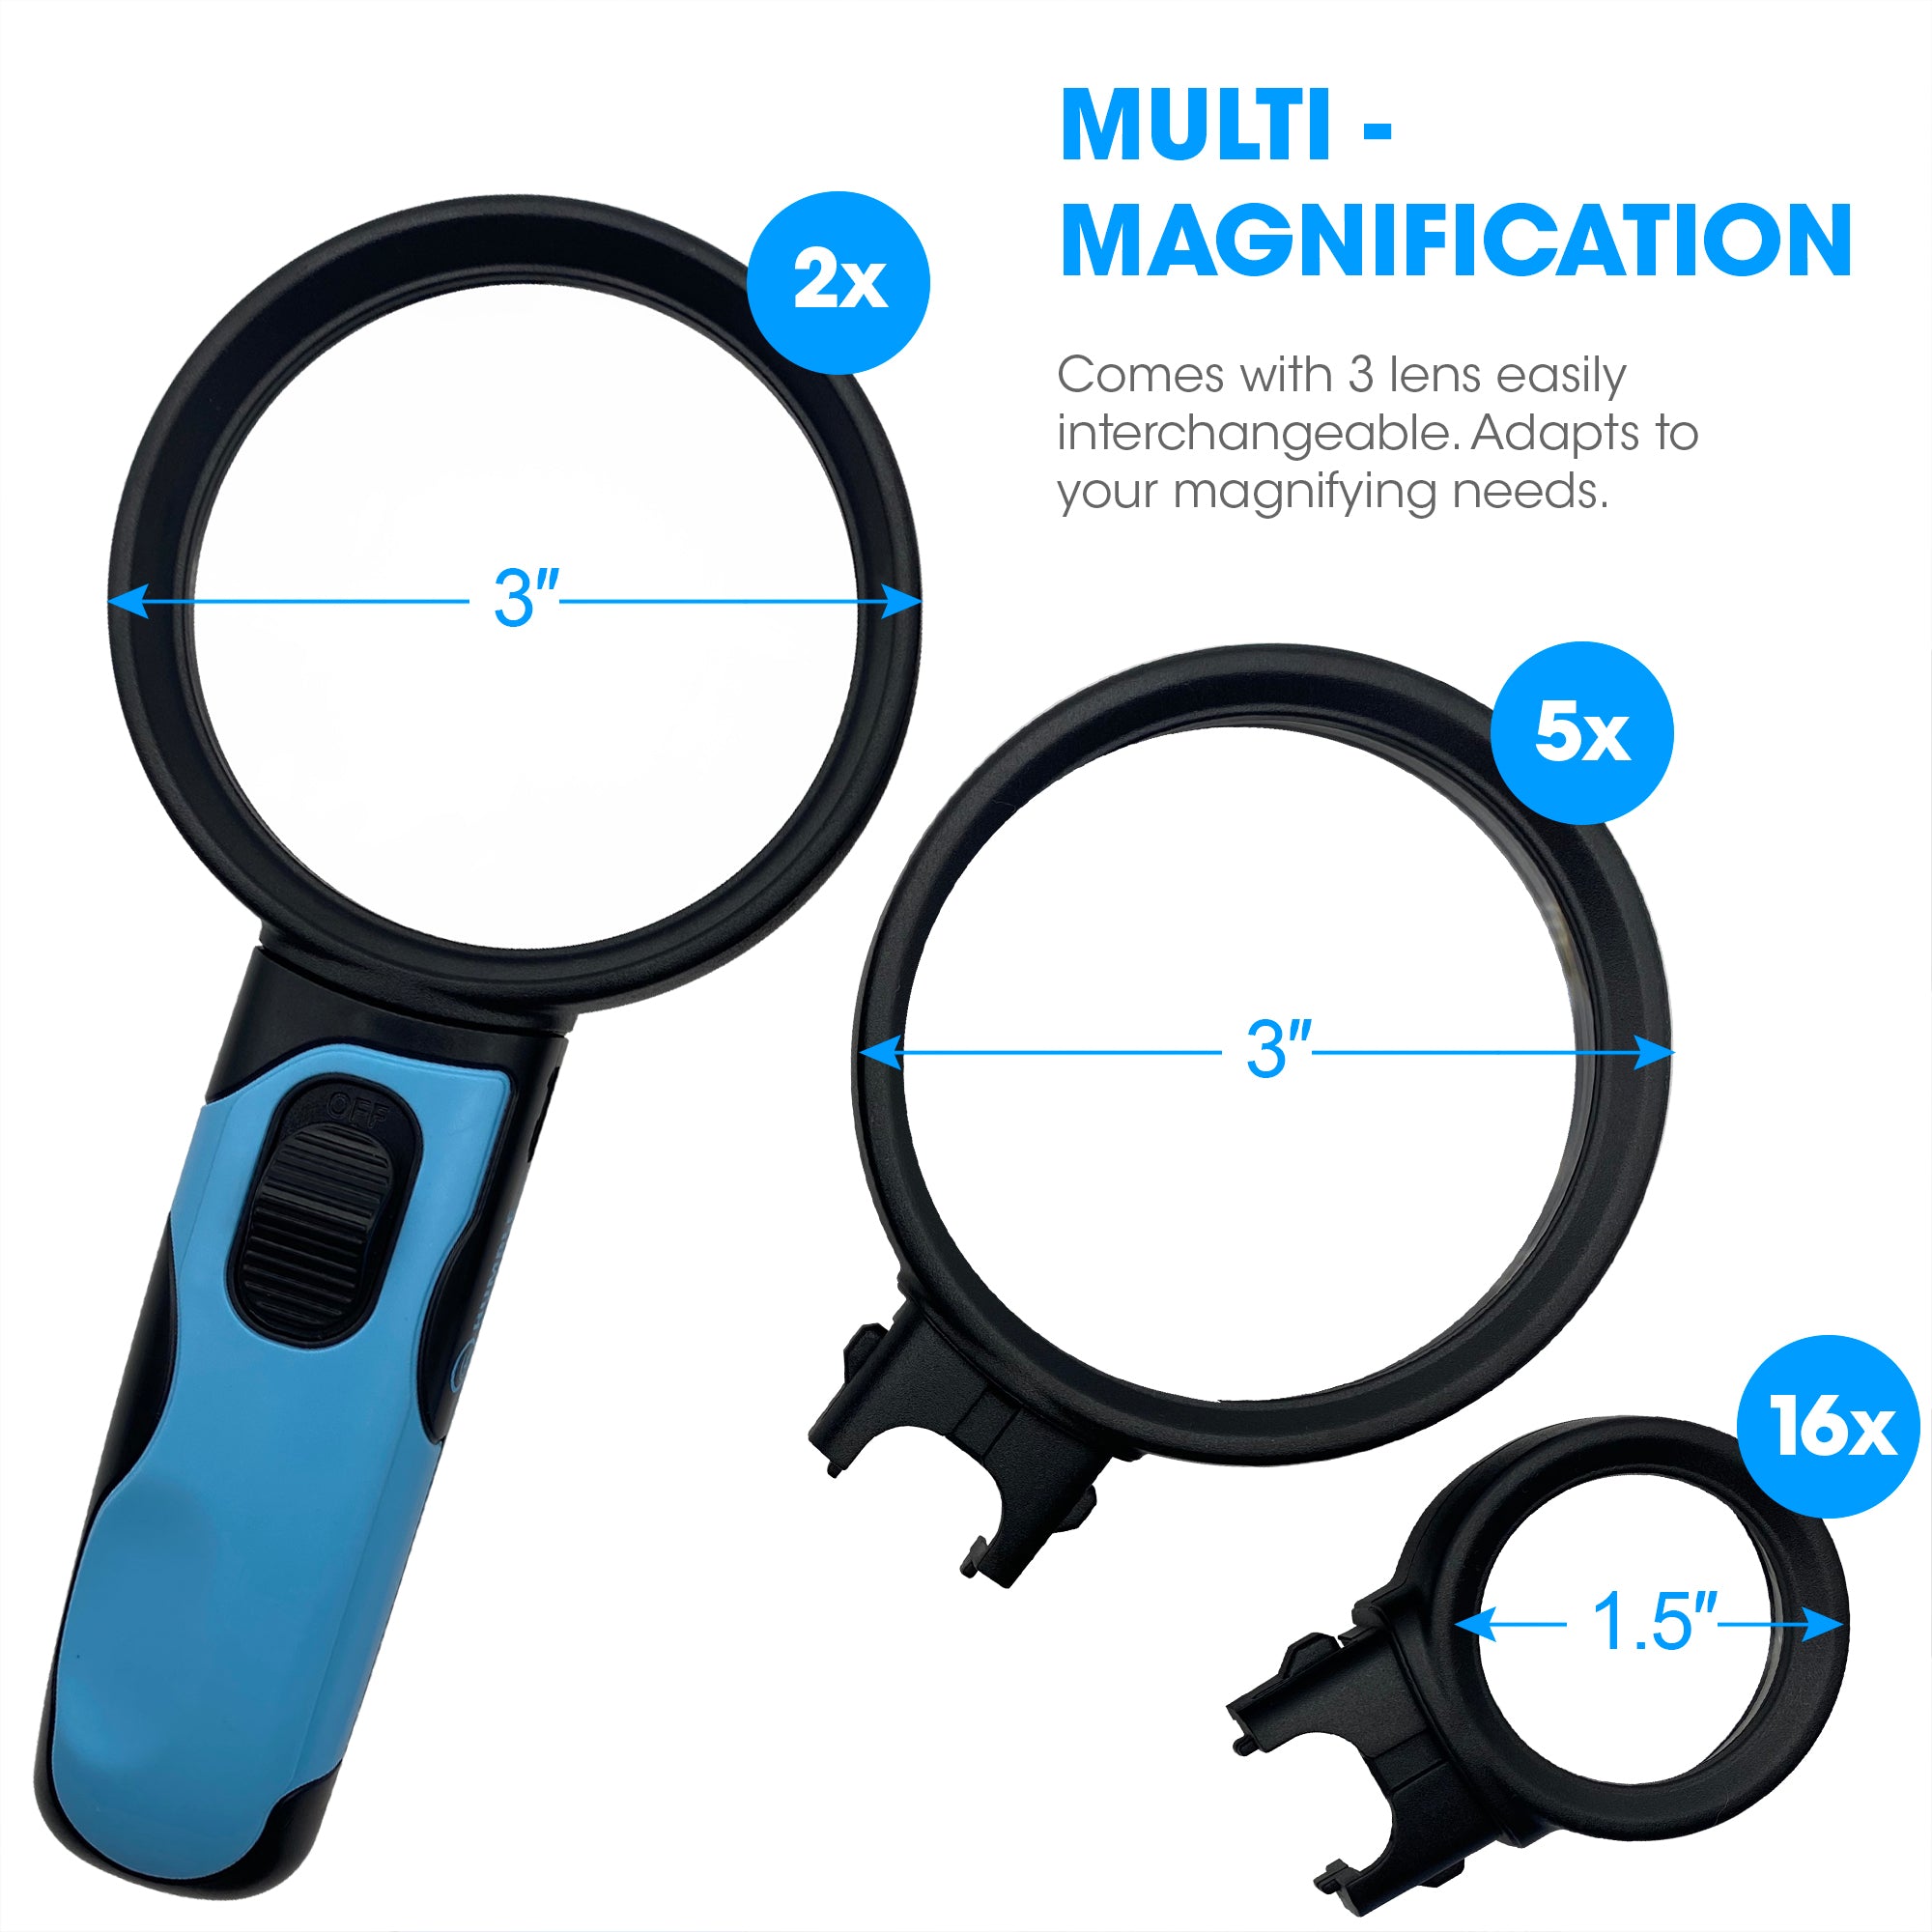 AIXPI Magnifying Glass with Light, 30X Handheld Large Magnifying Glass 12 LED Illuminated Lighted Magnifier for Macular Degeneration Seniors Reading